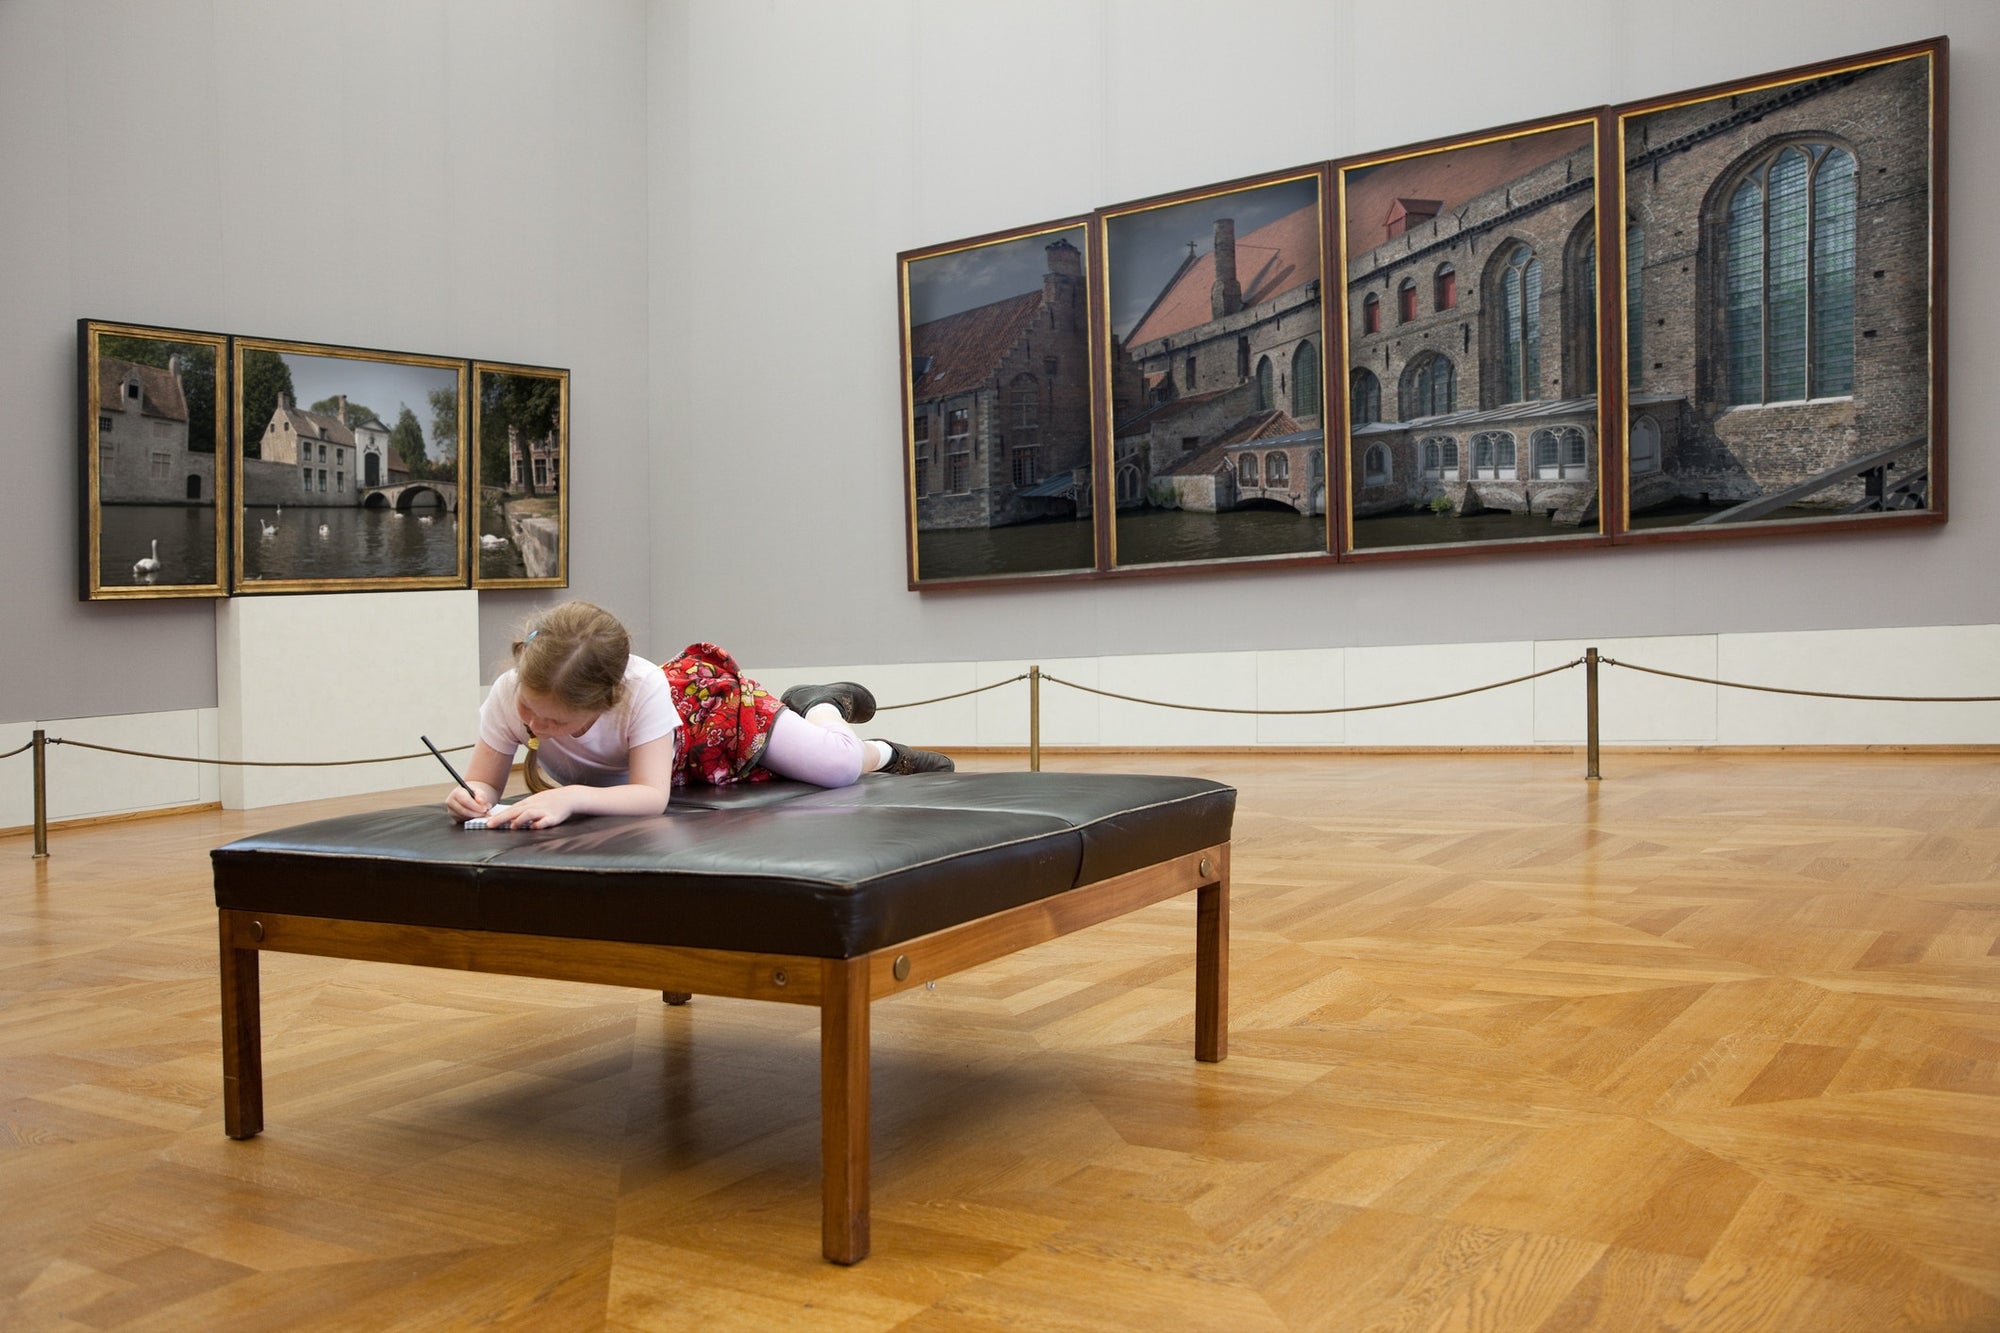 Little girl sitting on the sofa and drawing in a large exhibition room